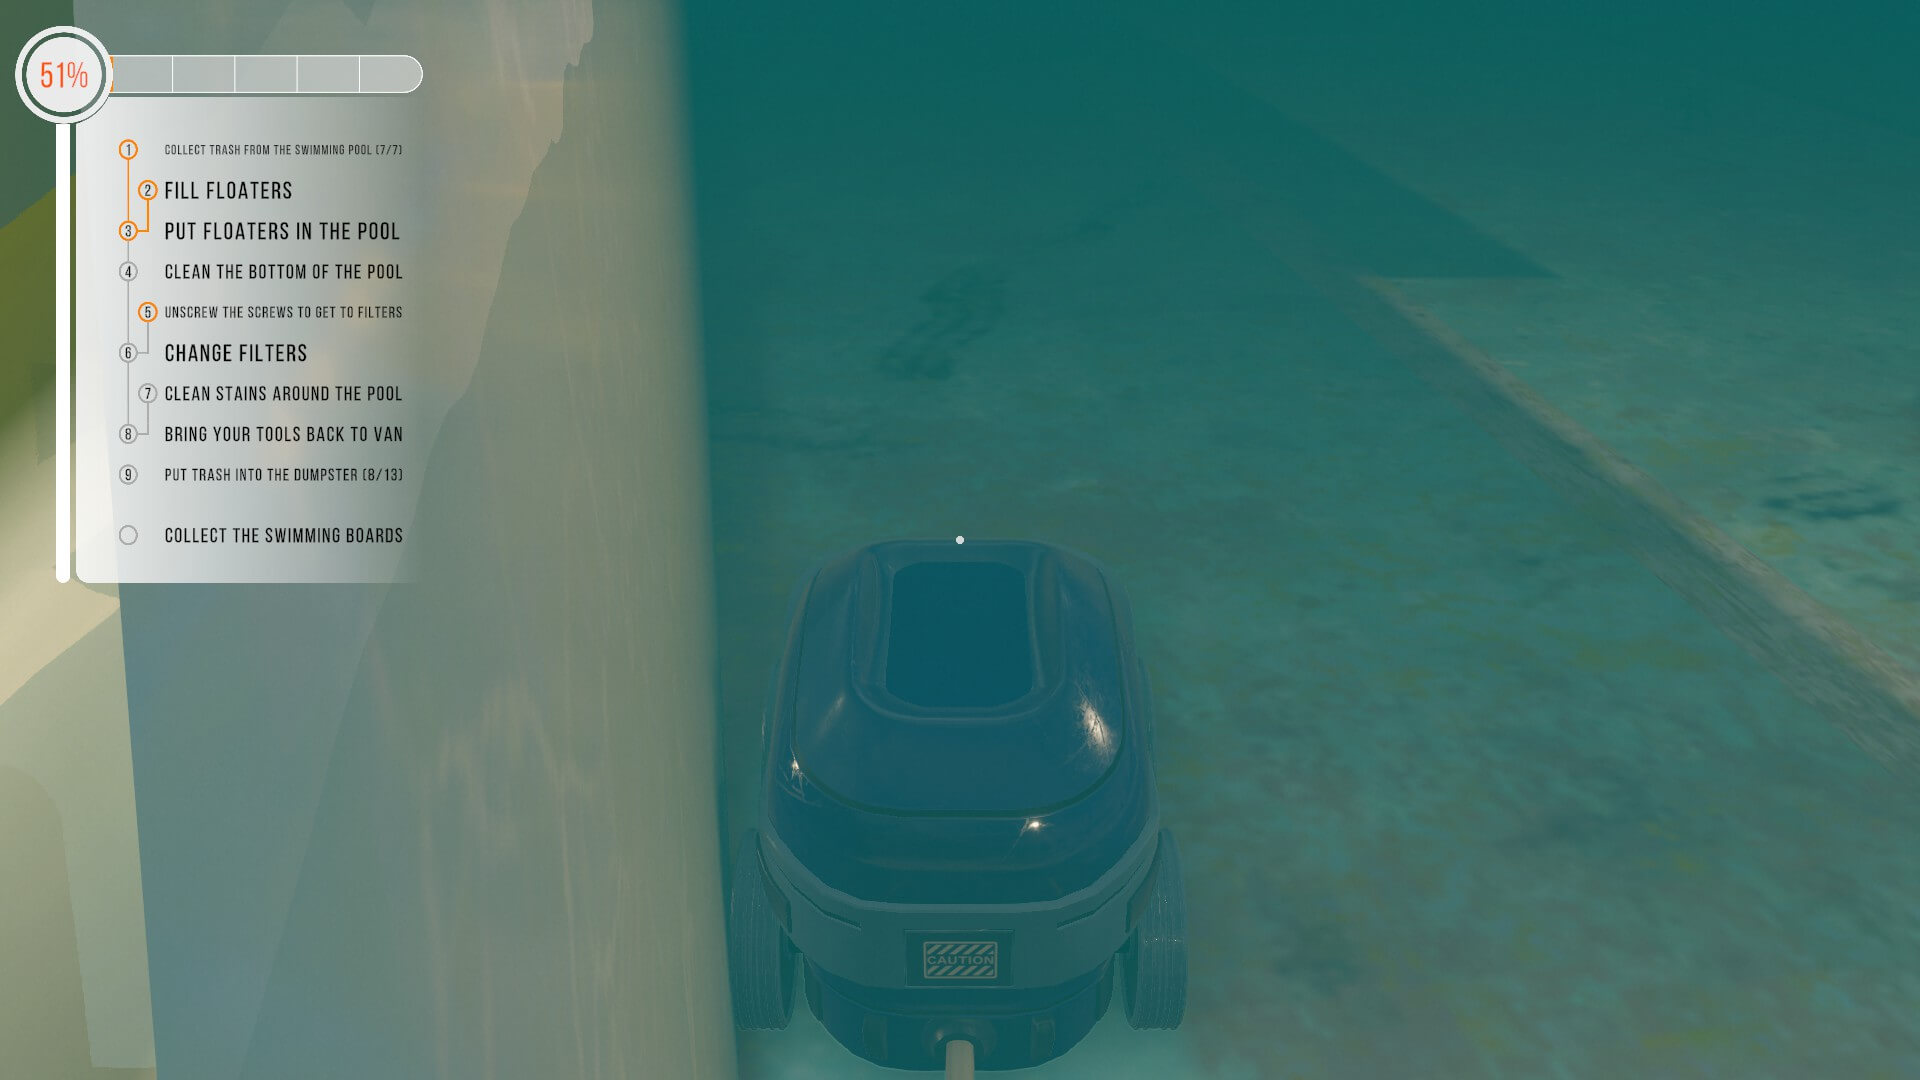 I'm currently controlling the Underwater Vacuum Cleaner. It is hard to make out due to the water being so muddy but the floor is a mixture of brown and green sludge. In the top left is the list of task i need to finish.